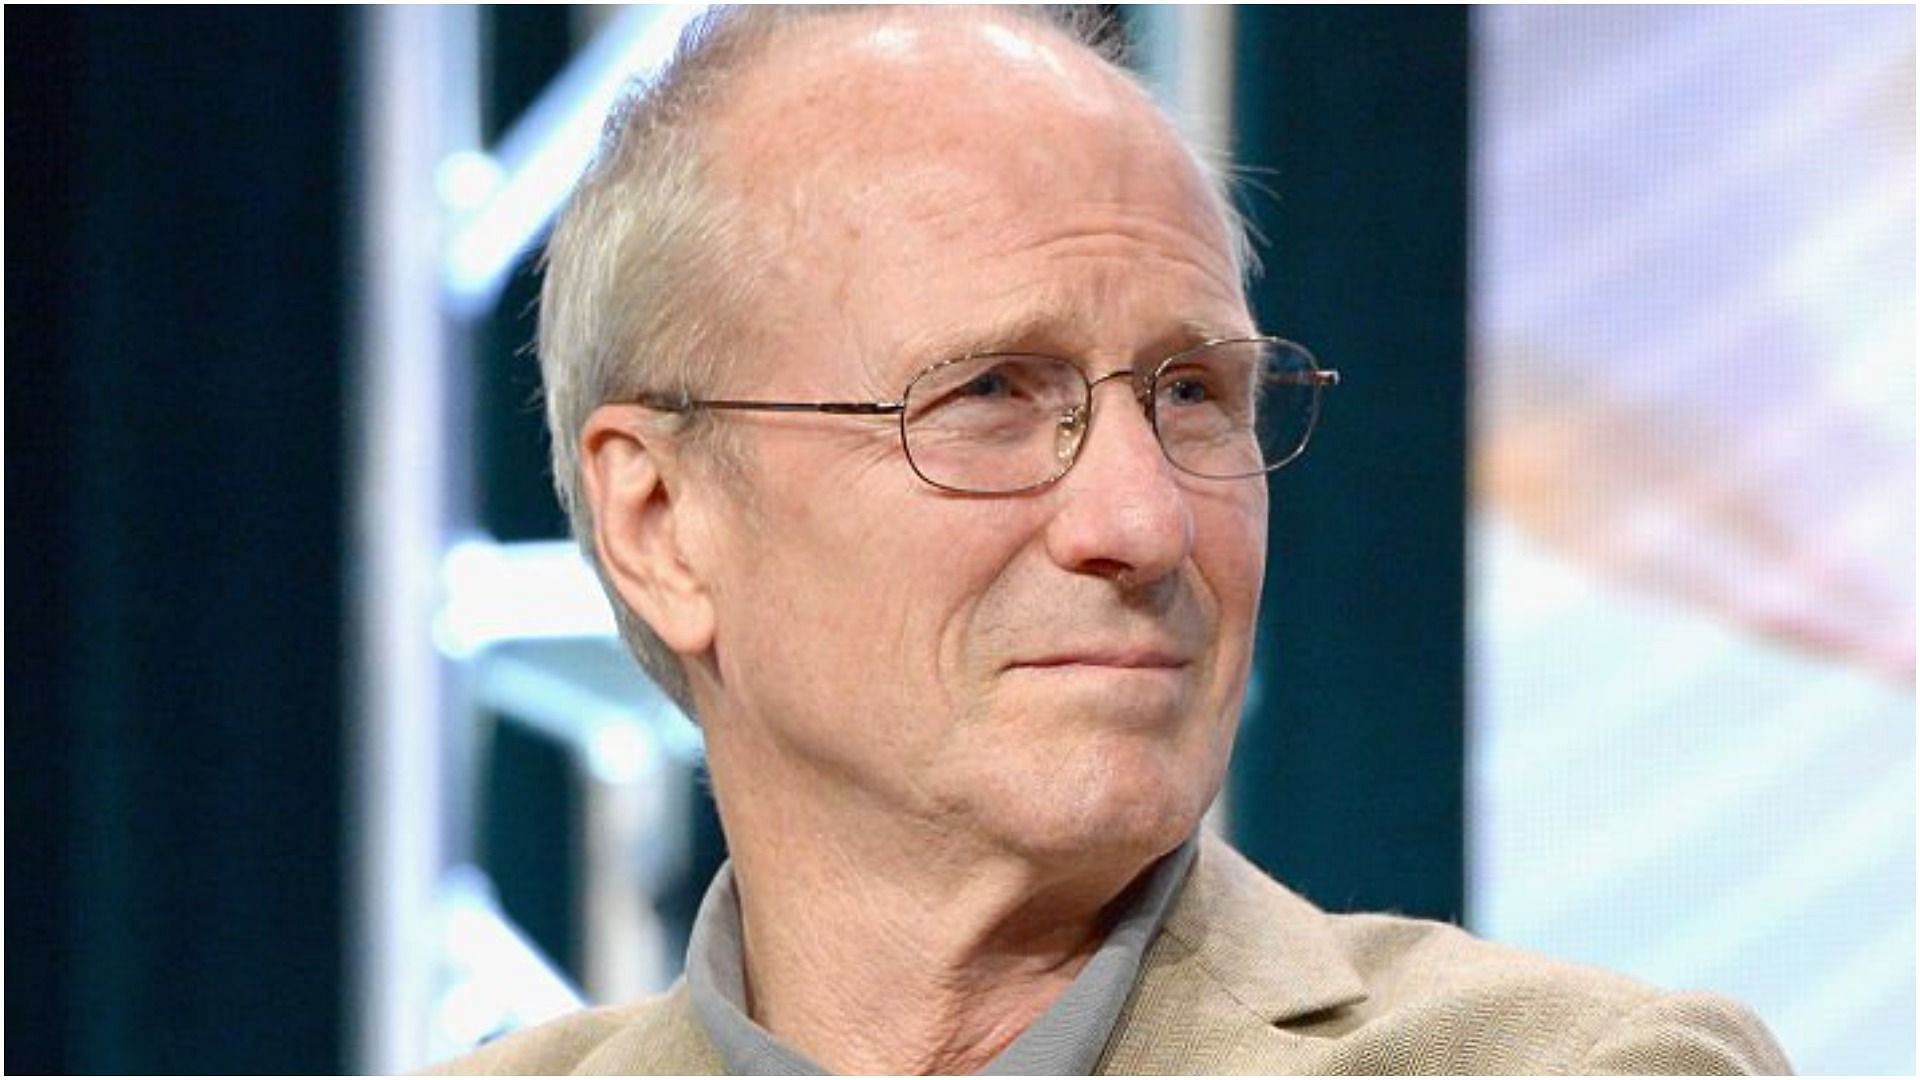 William Hurt recently passed away at the age of 71 (Image via Charey Gallay/Getty Images)